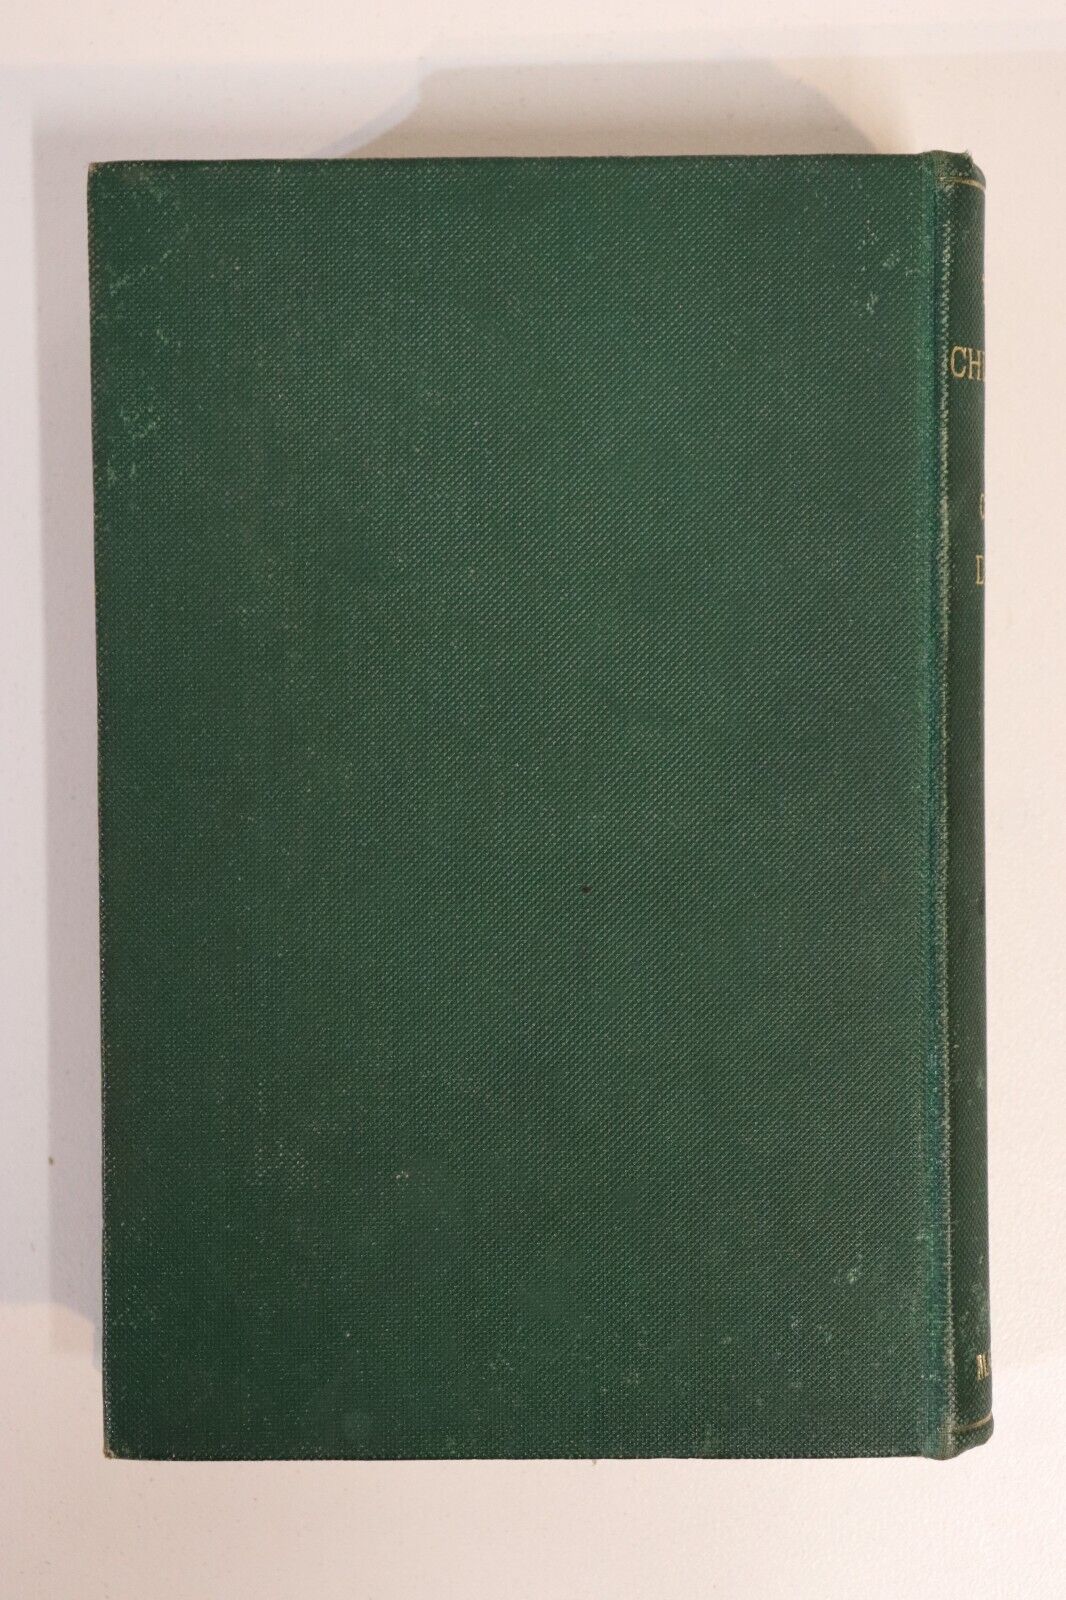 Martin Chuzzlewit by Charles Dickens - 1922 - Antique Classic Literature Book